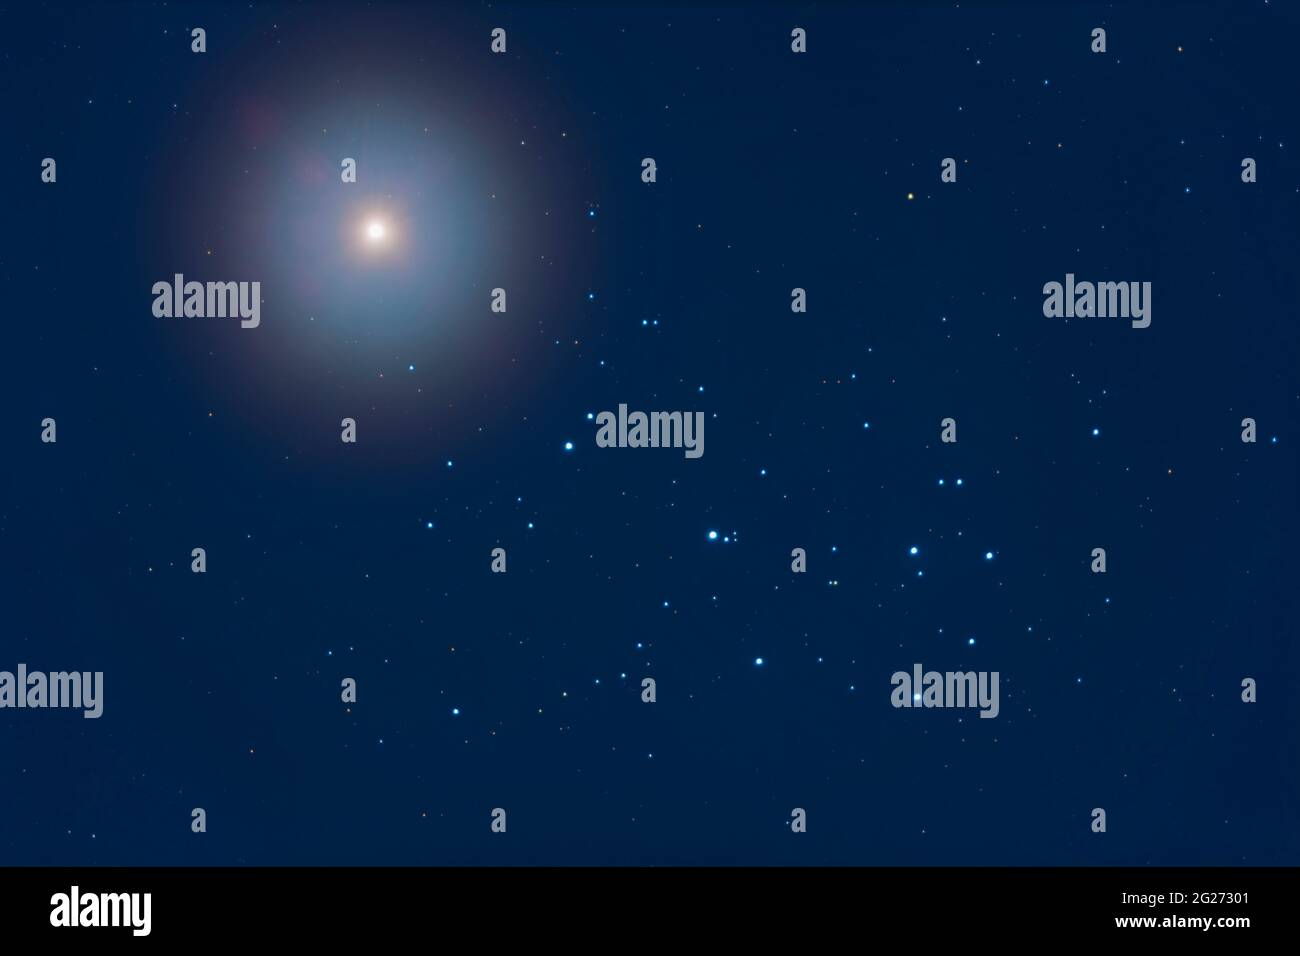 Venus above the Pleiades star cluster, M45, in the twilight and moonlight. Stock Photo